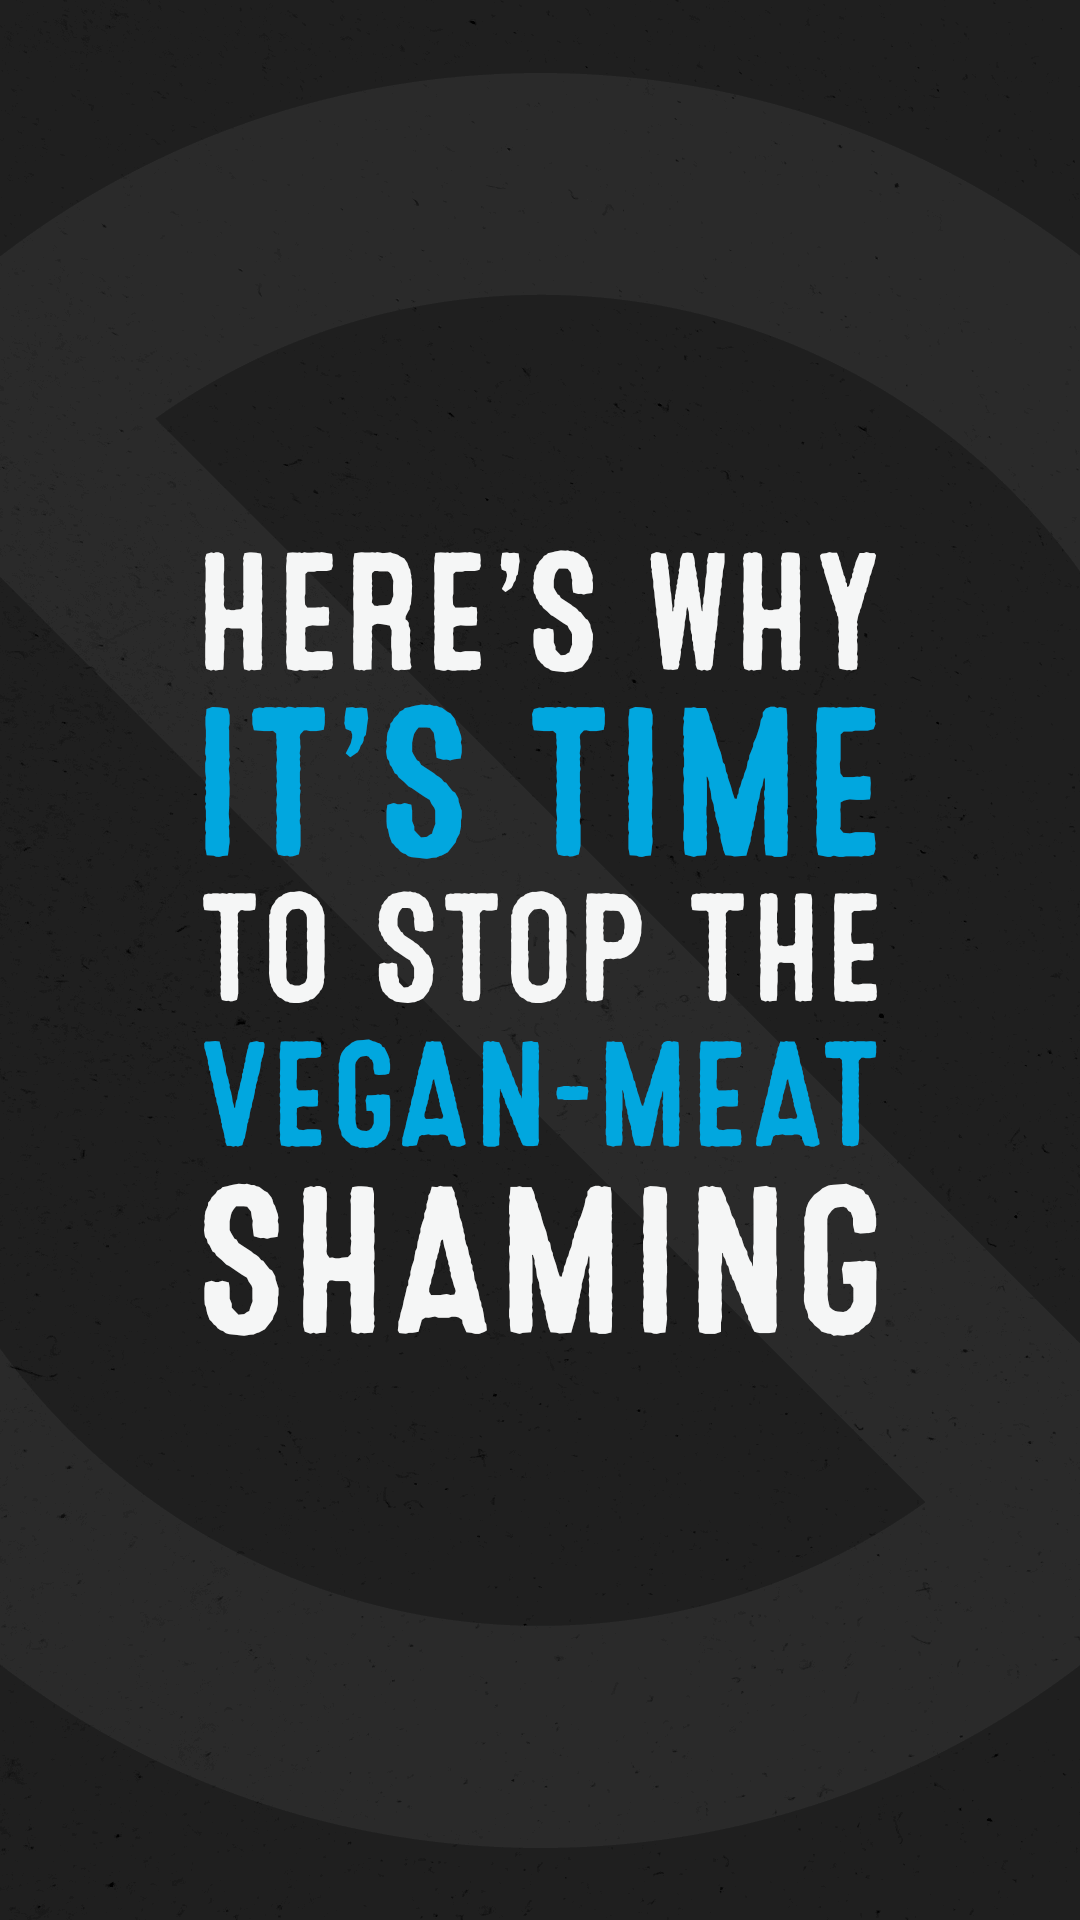 Here’s Why It’s Time to Stop the Vegan-Meat Shaming